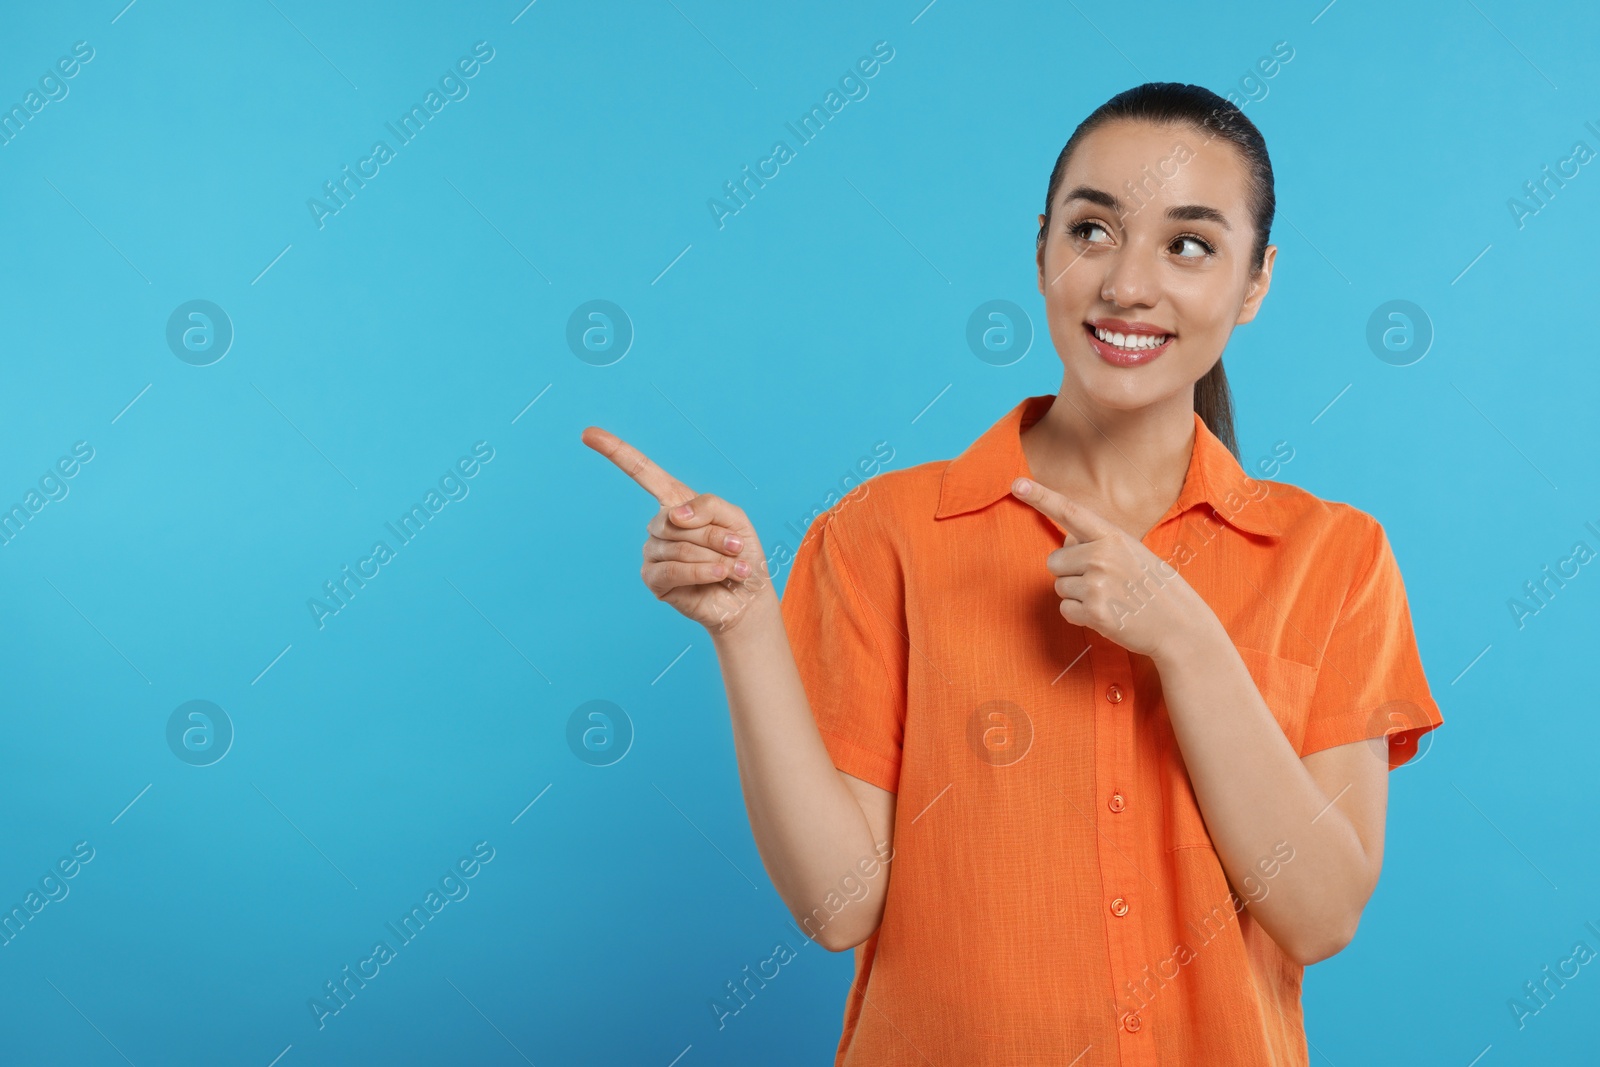 Photo of Special promotion. Smiling woman pointing at something on light blue background. Space for text